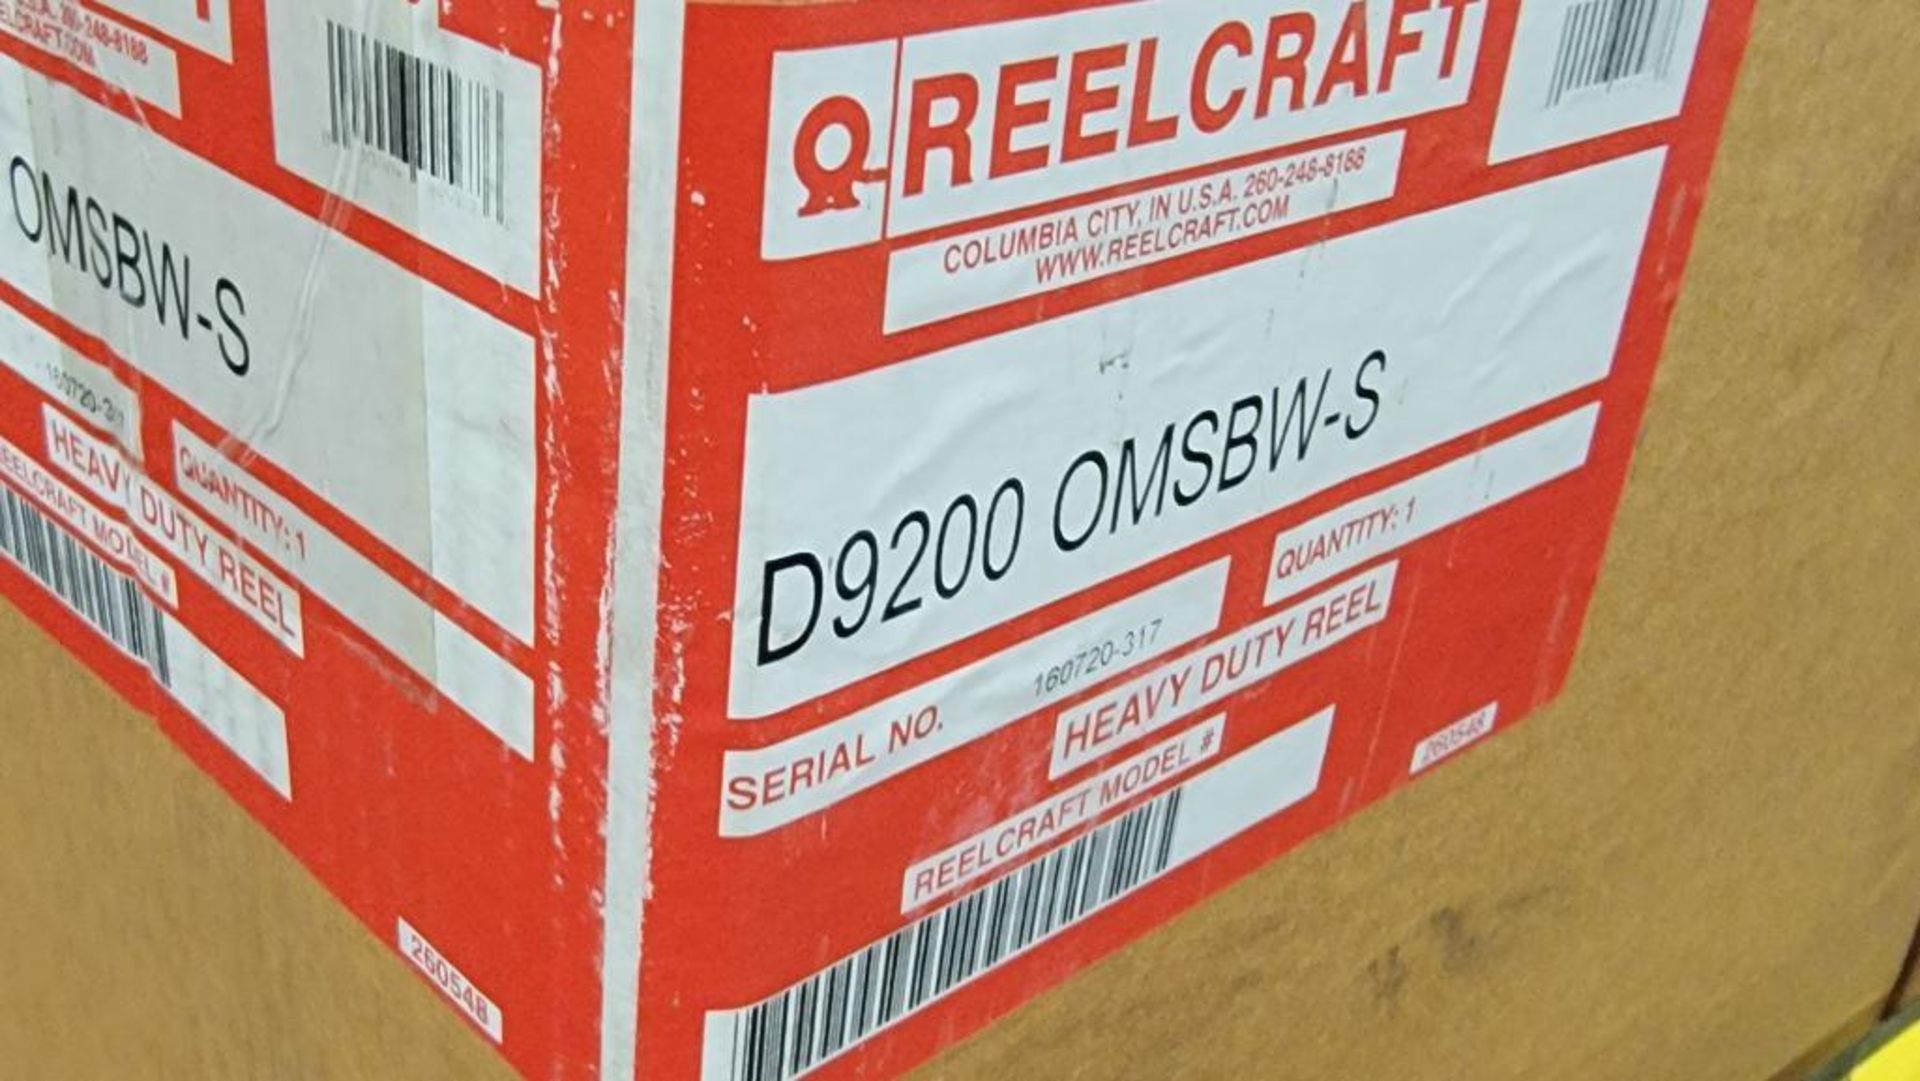 (3) Reelcraft Hose Reels, Model D9200 OMSBW-S (New in Box) - Image 2 of 2